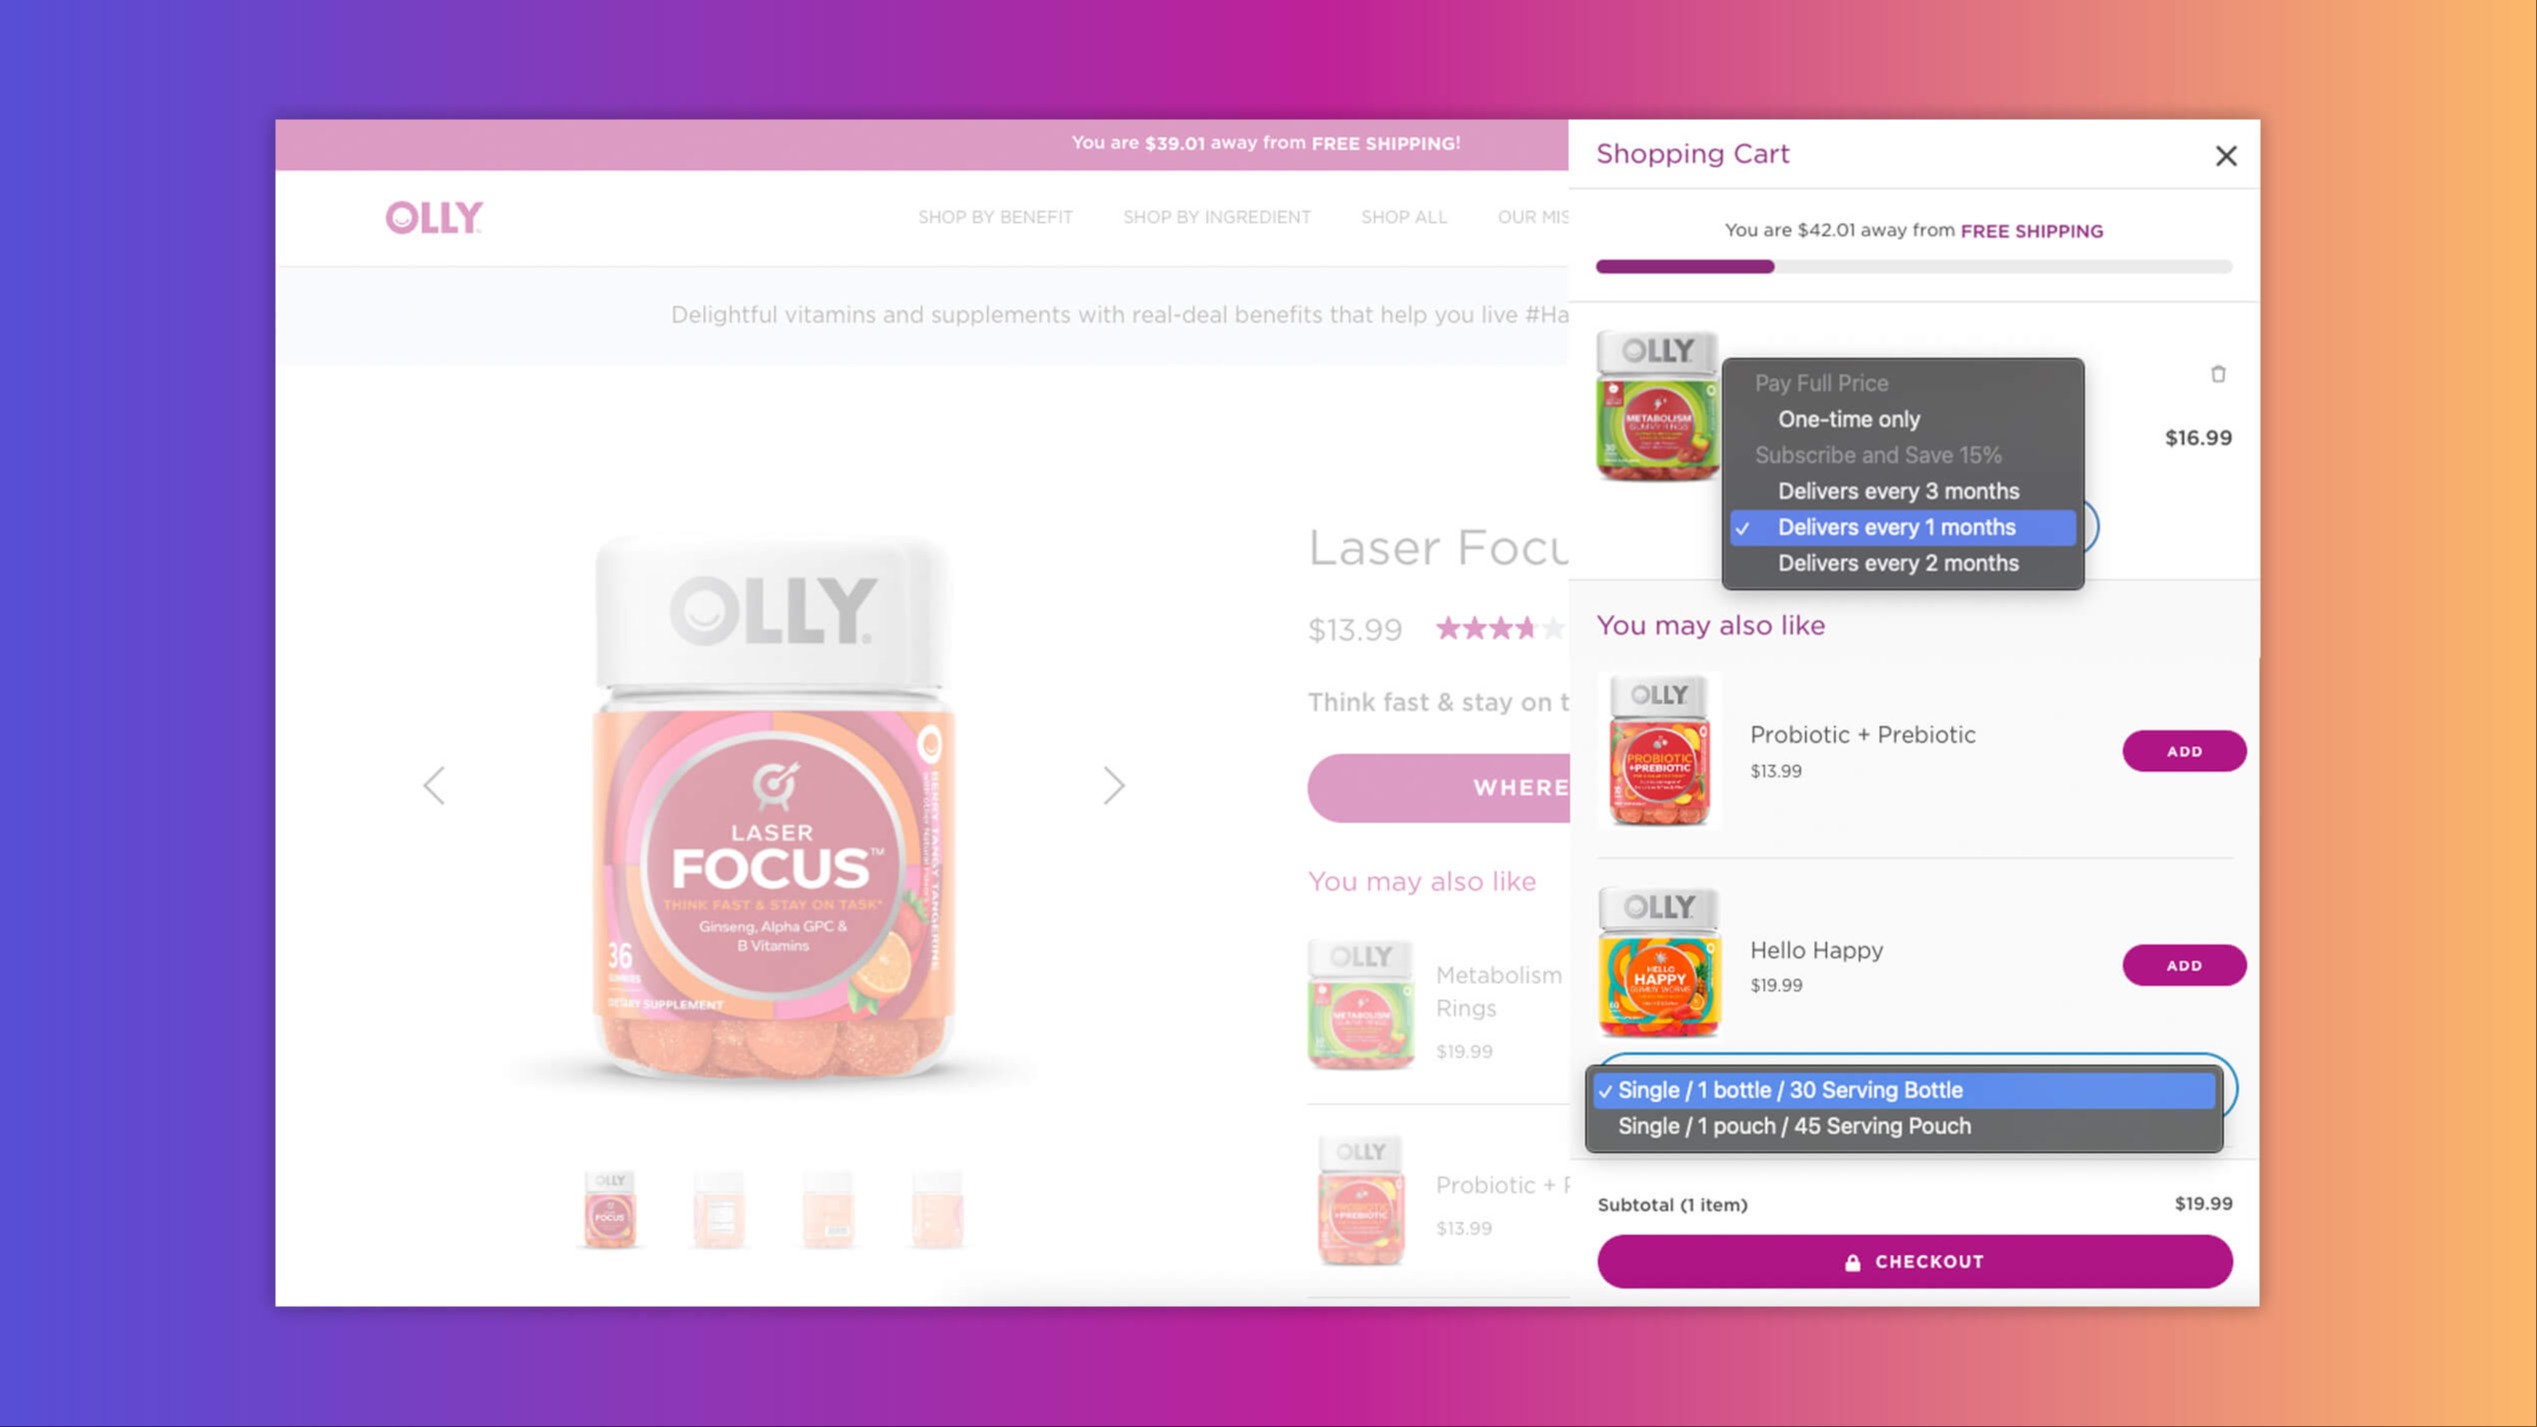 A product recommendation example showing OLLY's in-cart subscription upsells